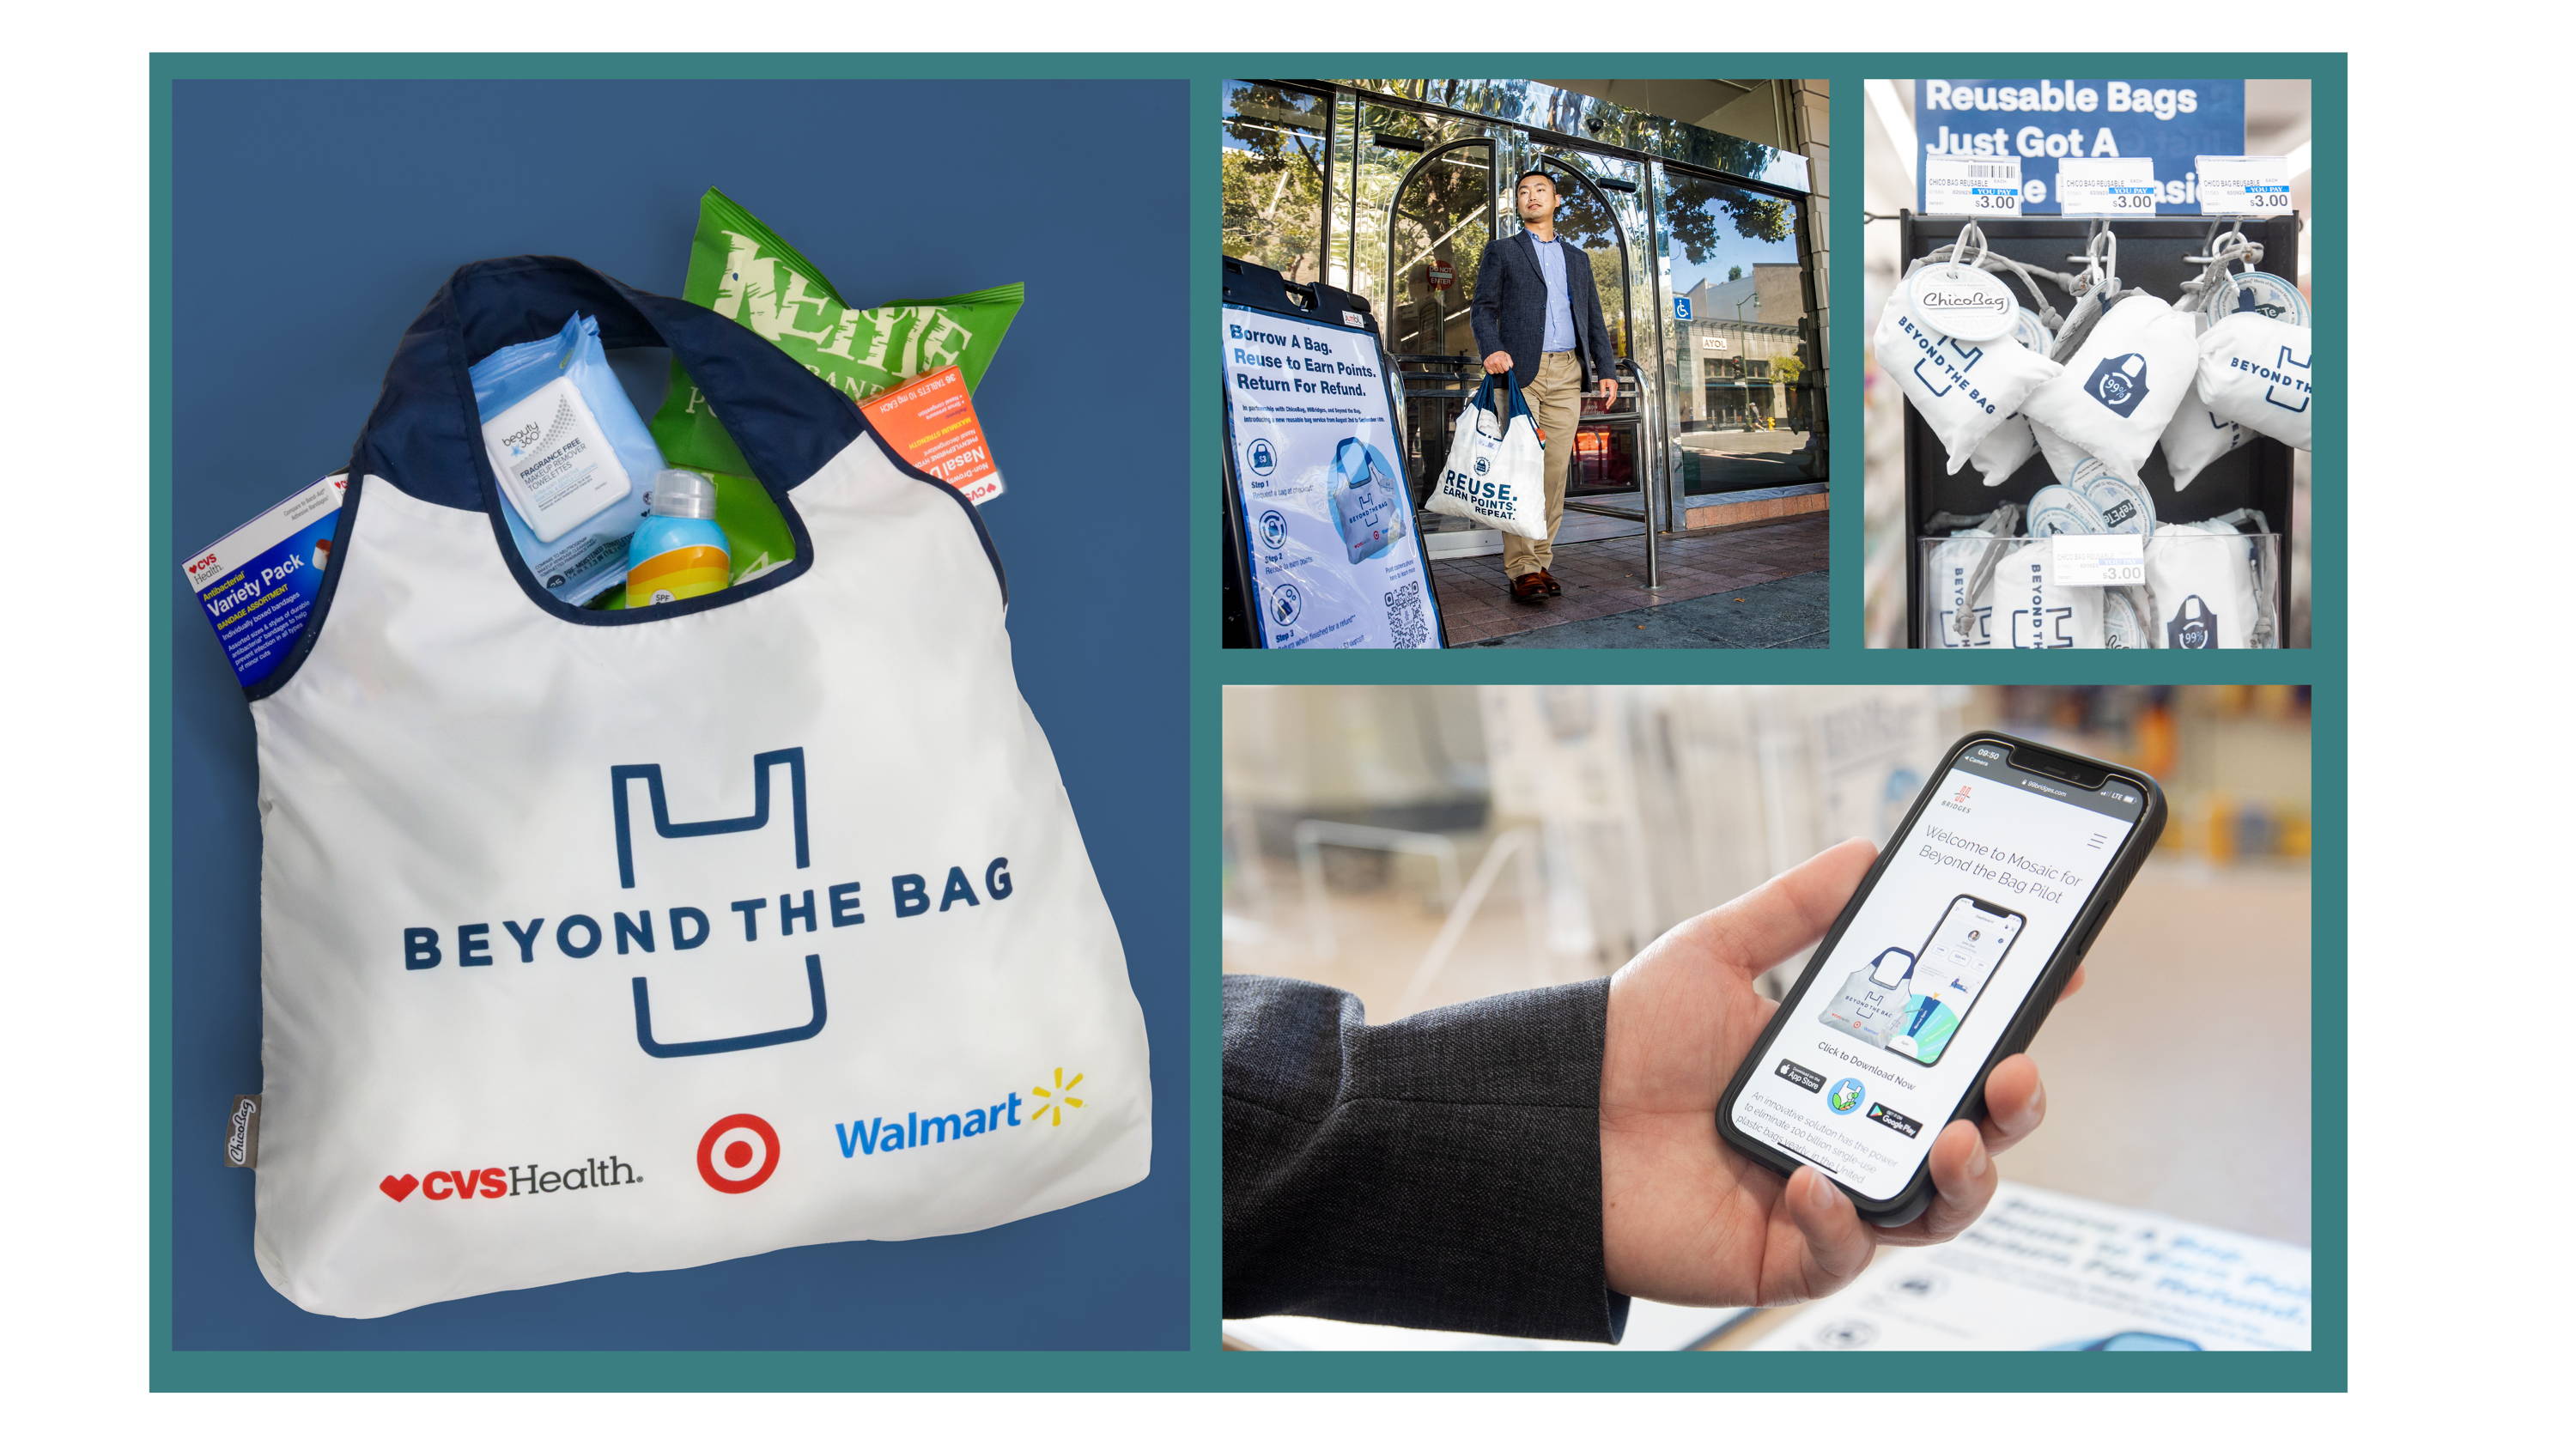 ChicoBag Launches its Beyond the bag program that creates a circular borrow a bag program with CVS Target and Walgreens